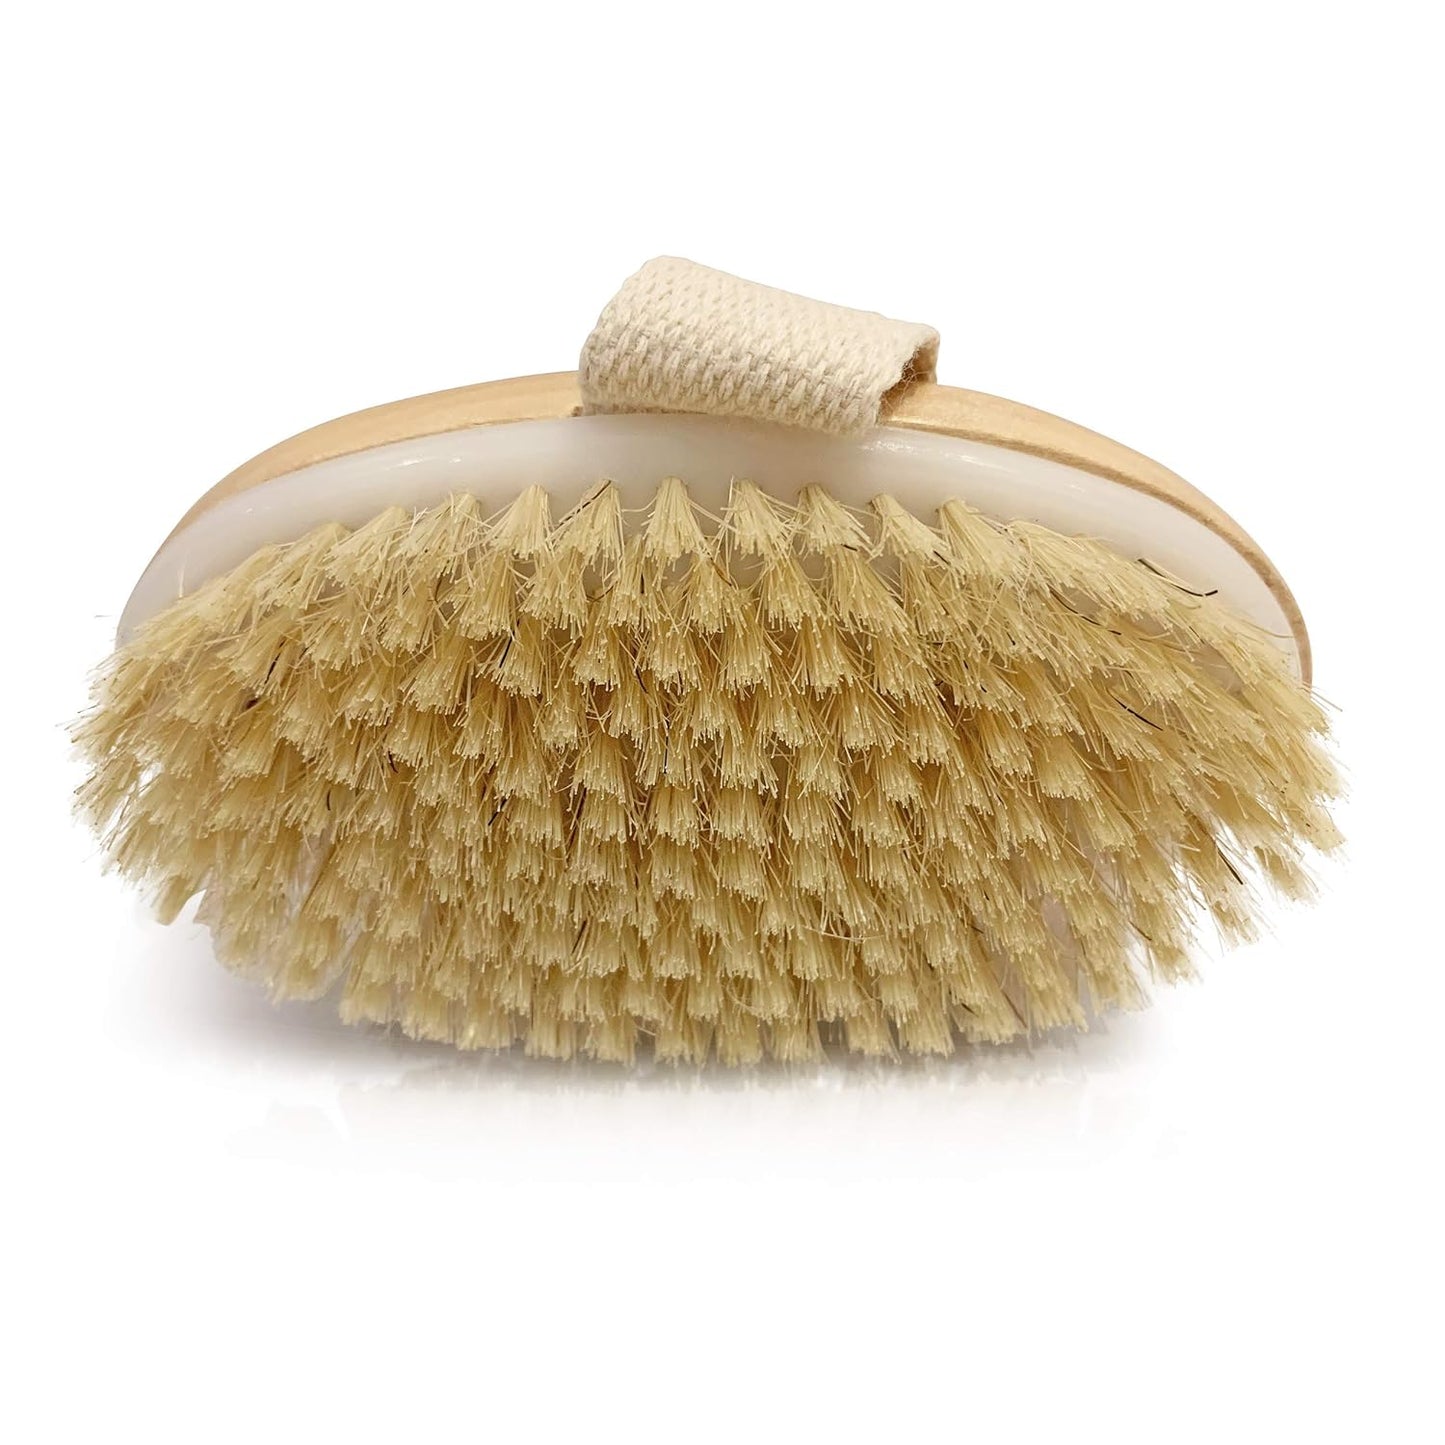 Wet and Dry Body Brush Exfoliator - Medium Soft Natural Bristle - Exfoliates Dead Skin - Slows Aging - Reduces Cellulite - Stimulates Lymph and Blood Flow and Increases Energy